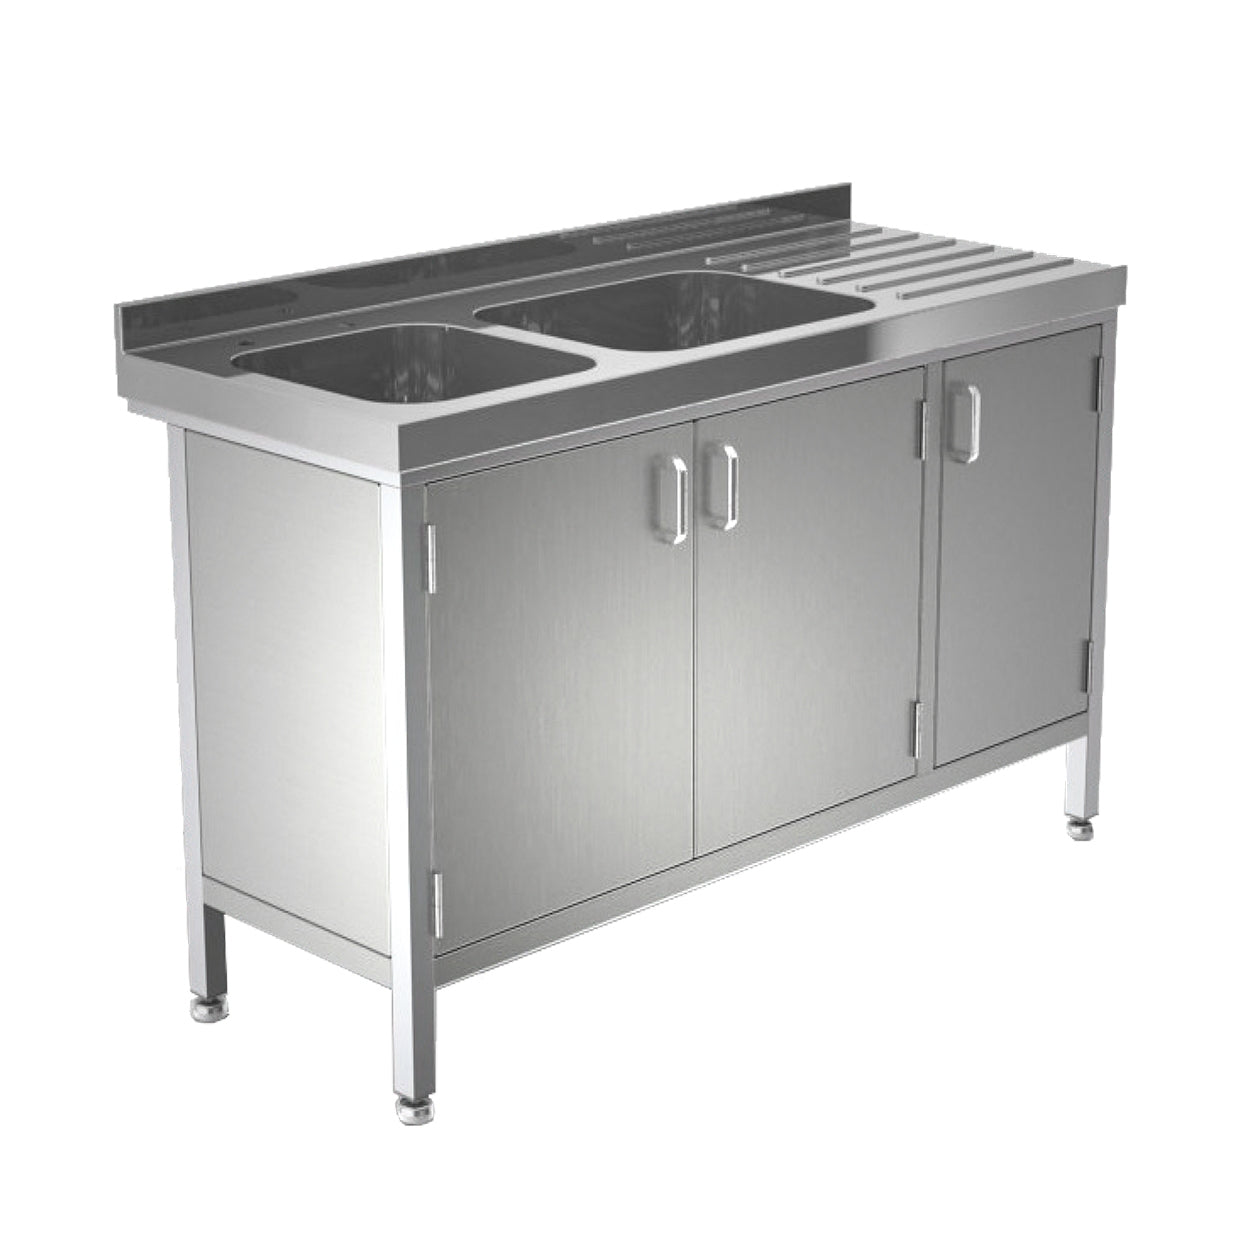 Stainless steel double bowl sink with cupboard